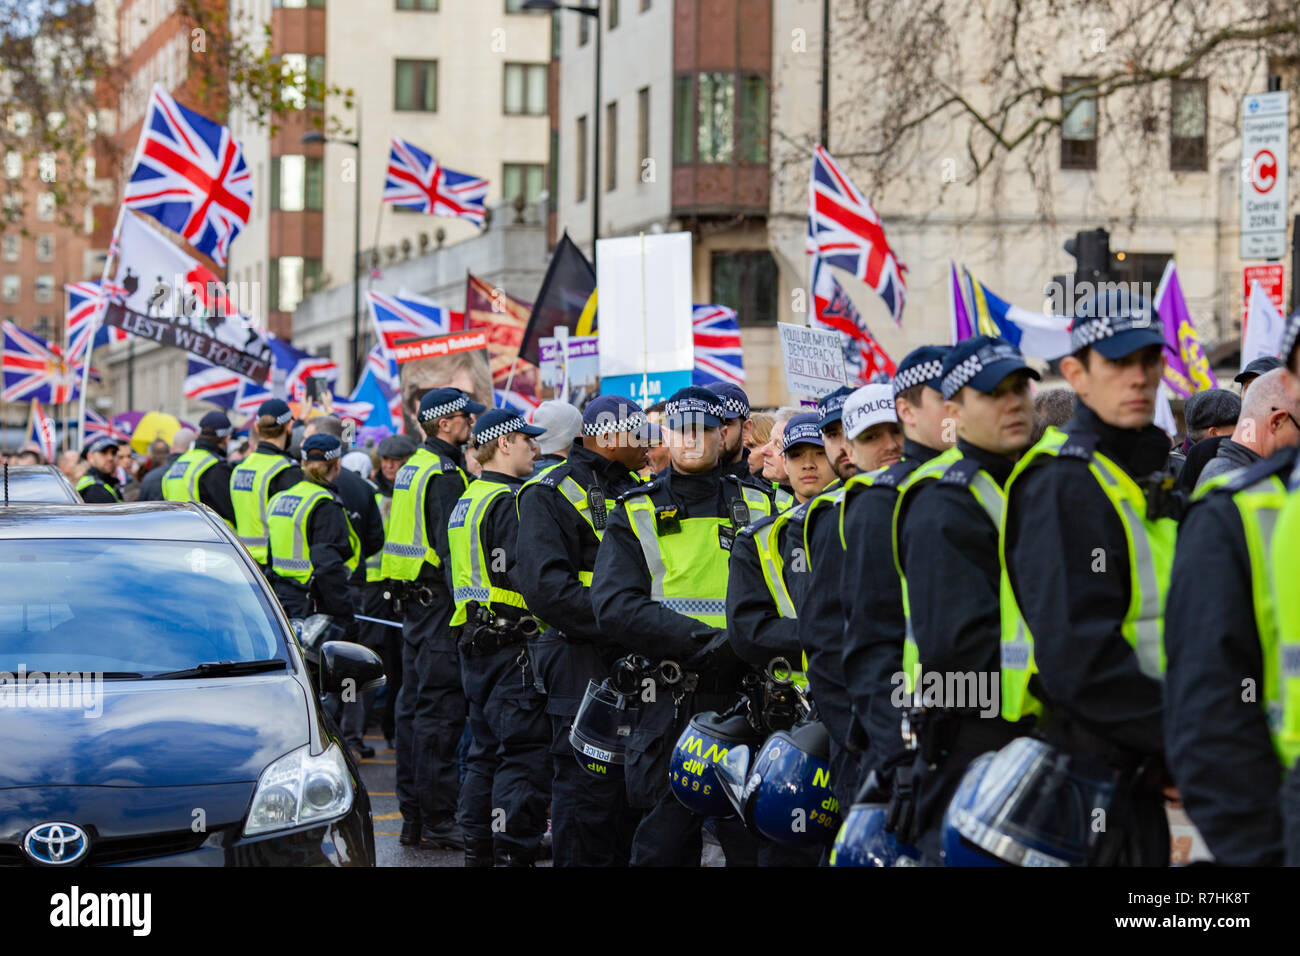 Police contain the crowd at the Pro-Brexit march.   3,000 Pro-Brexit demonstrators and 15,000 Anti-Facist counter demonstrators took to the streets of London to voice their stance on the deal ahead of the key Brexit vote in parliament this Tuesday. Stock Photo